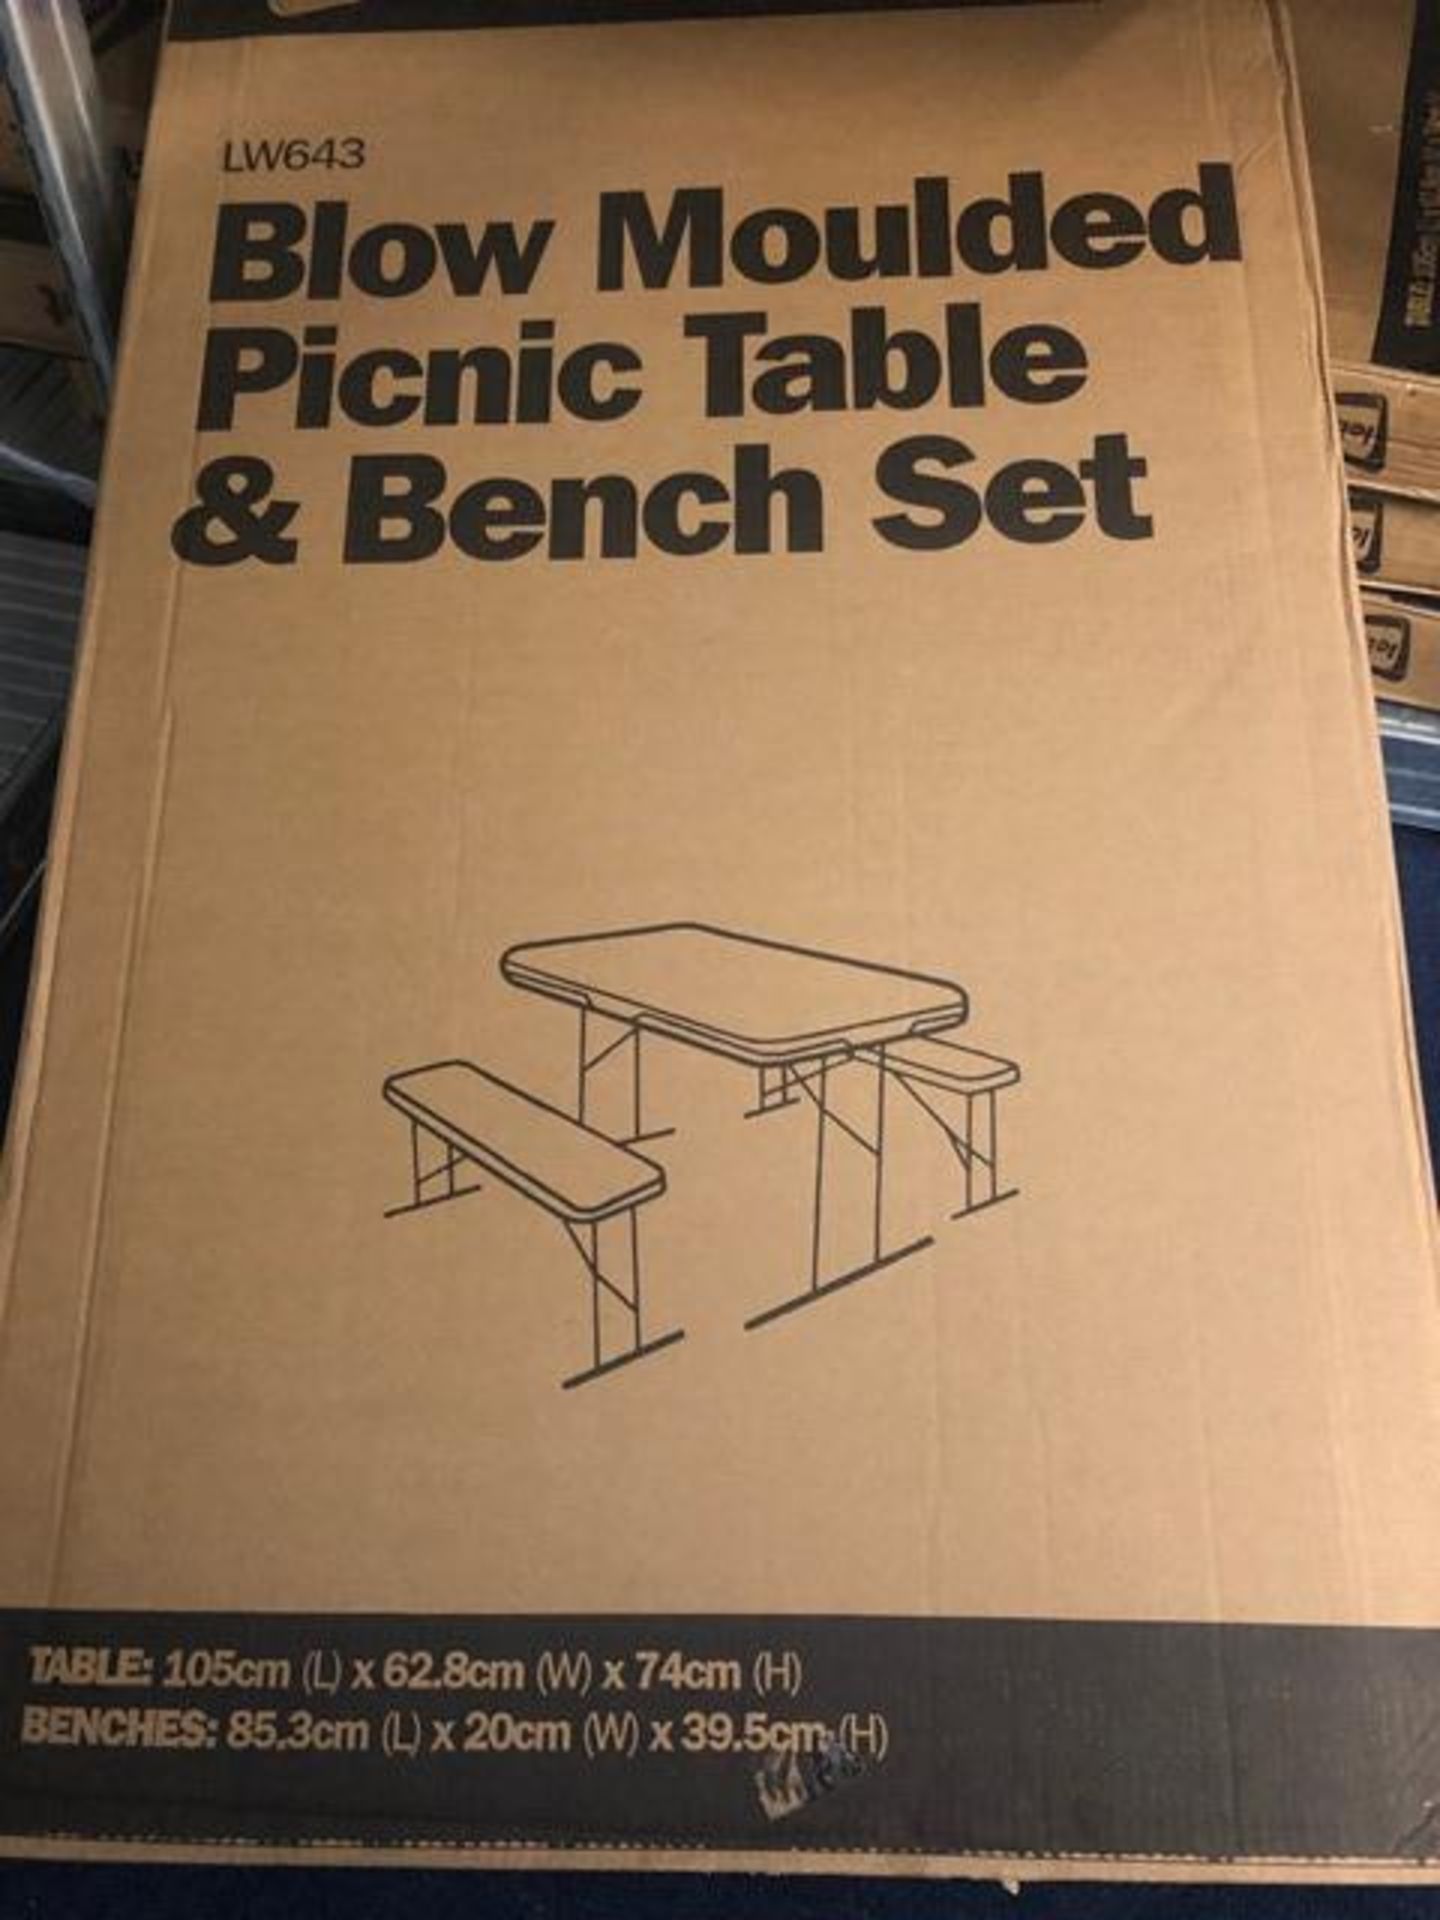 Four Leisurewize Blow Moulded Folding Picnic Tables & Bench Seats - Image 2 of 2